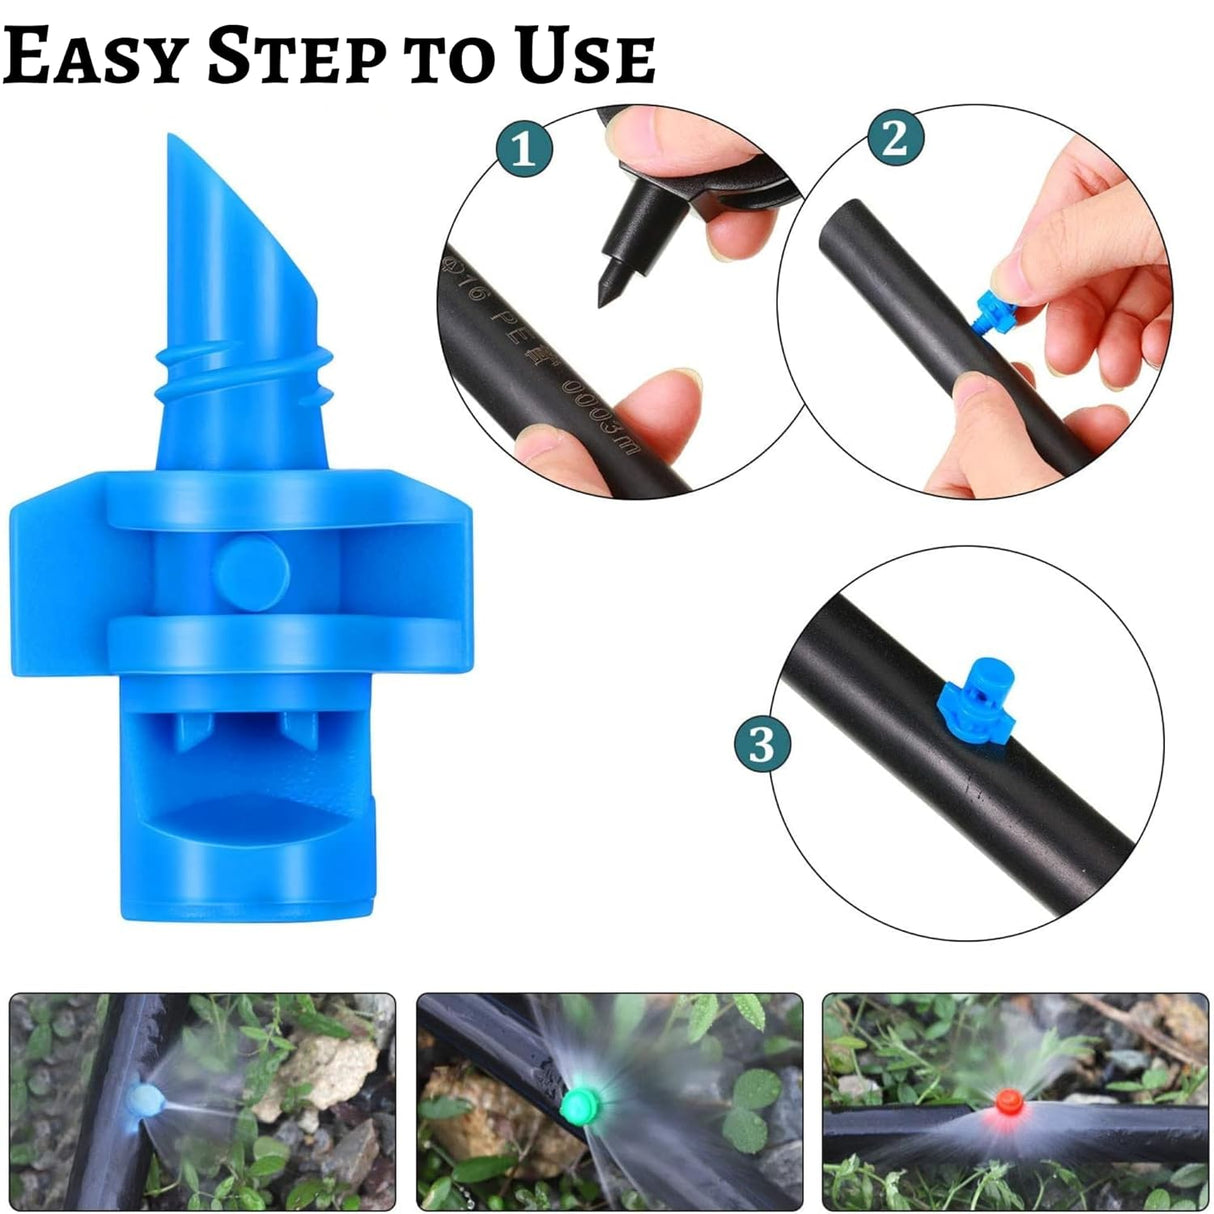 Singhal Water Spray Misting Nozzle Pack of 100, Mini Sprinkler Sprayer Drip Irrigation for Plants Garden Lawn Irrigation System, 180 Degree, Plastic, Green